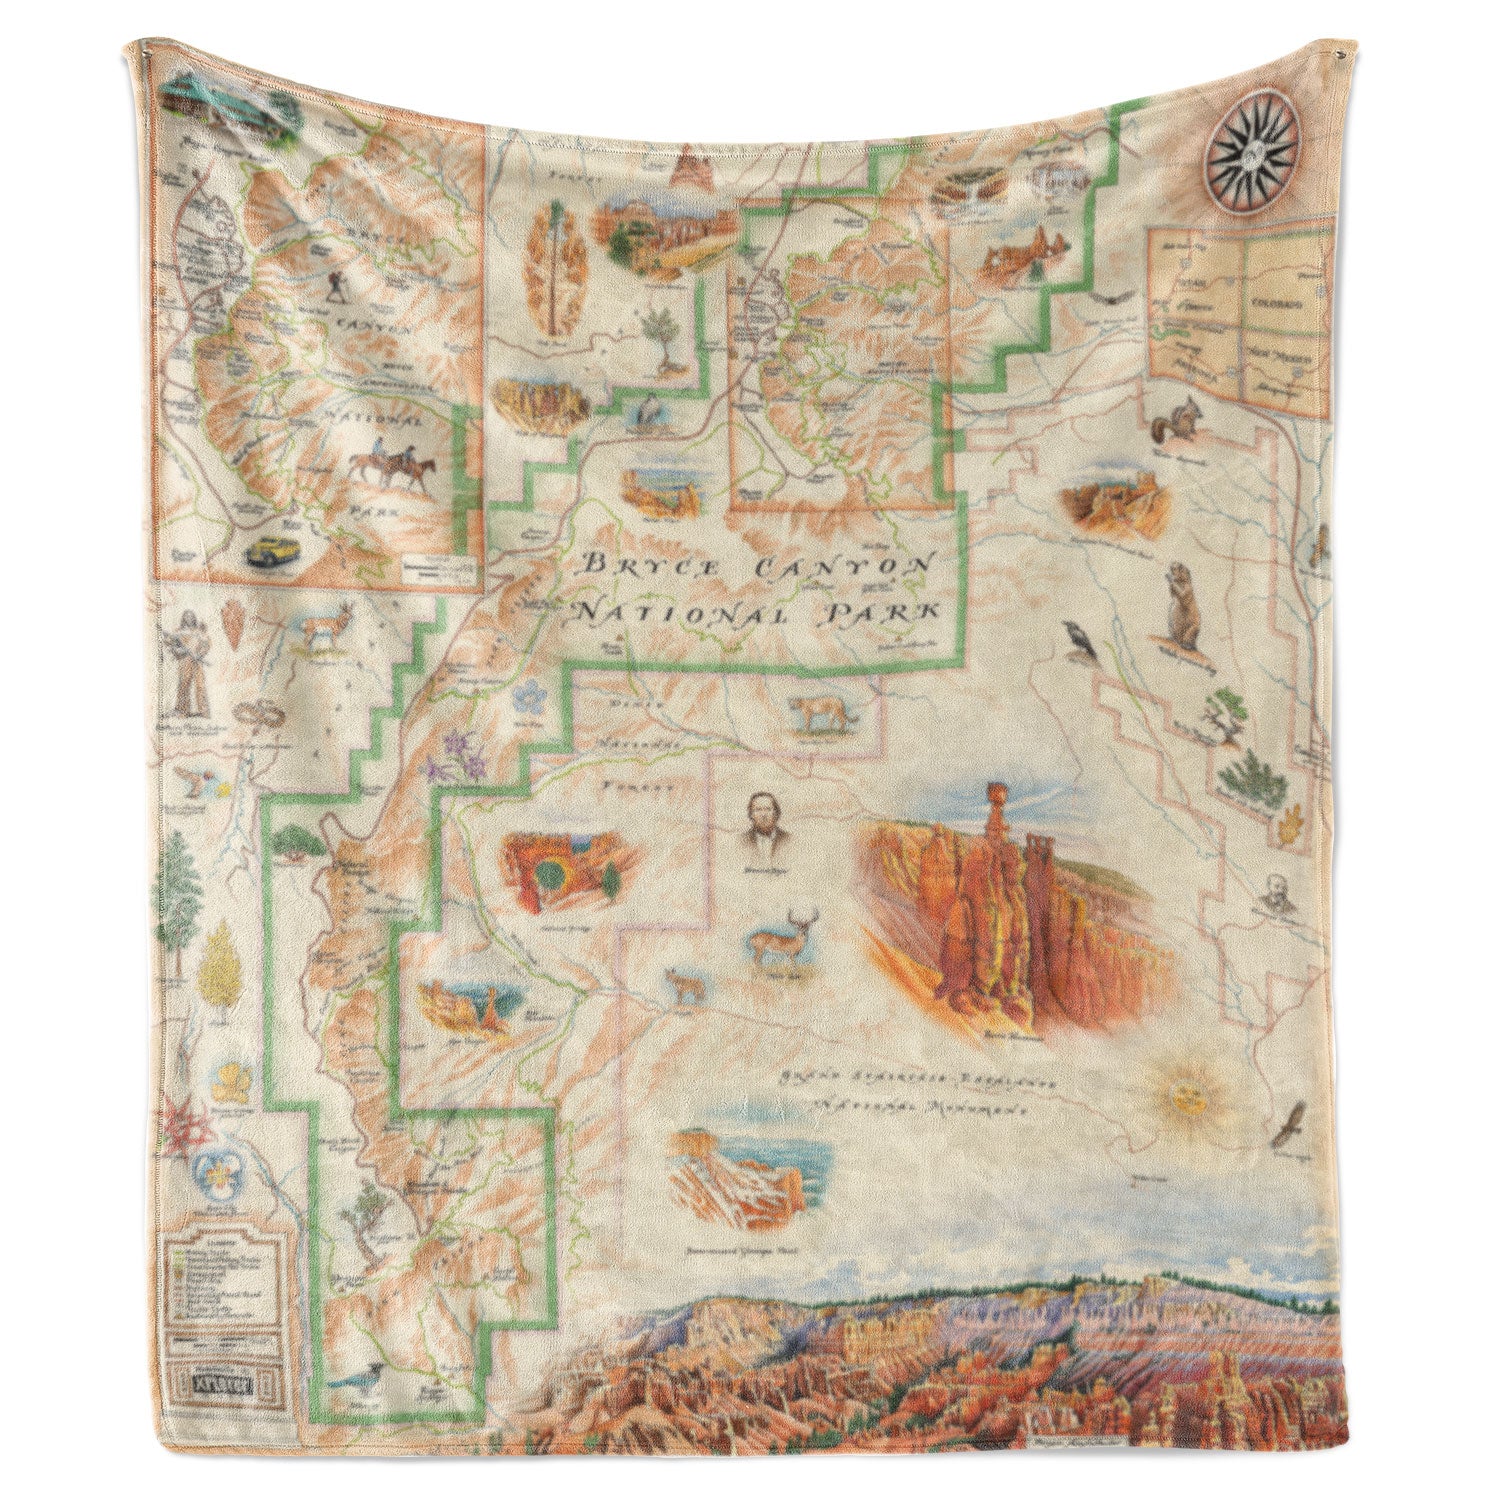 Fleece blanket with Bryce Canyon National Park map: Thors Hammer, Bryce Amphitheater, Ebenezer Bryce. Size: 58